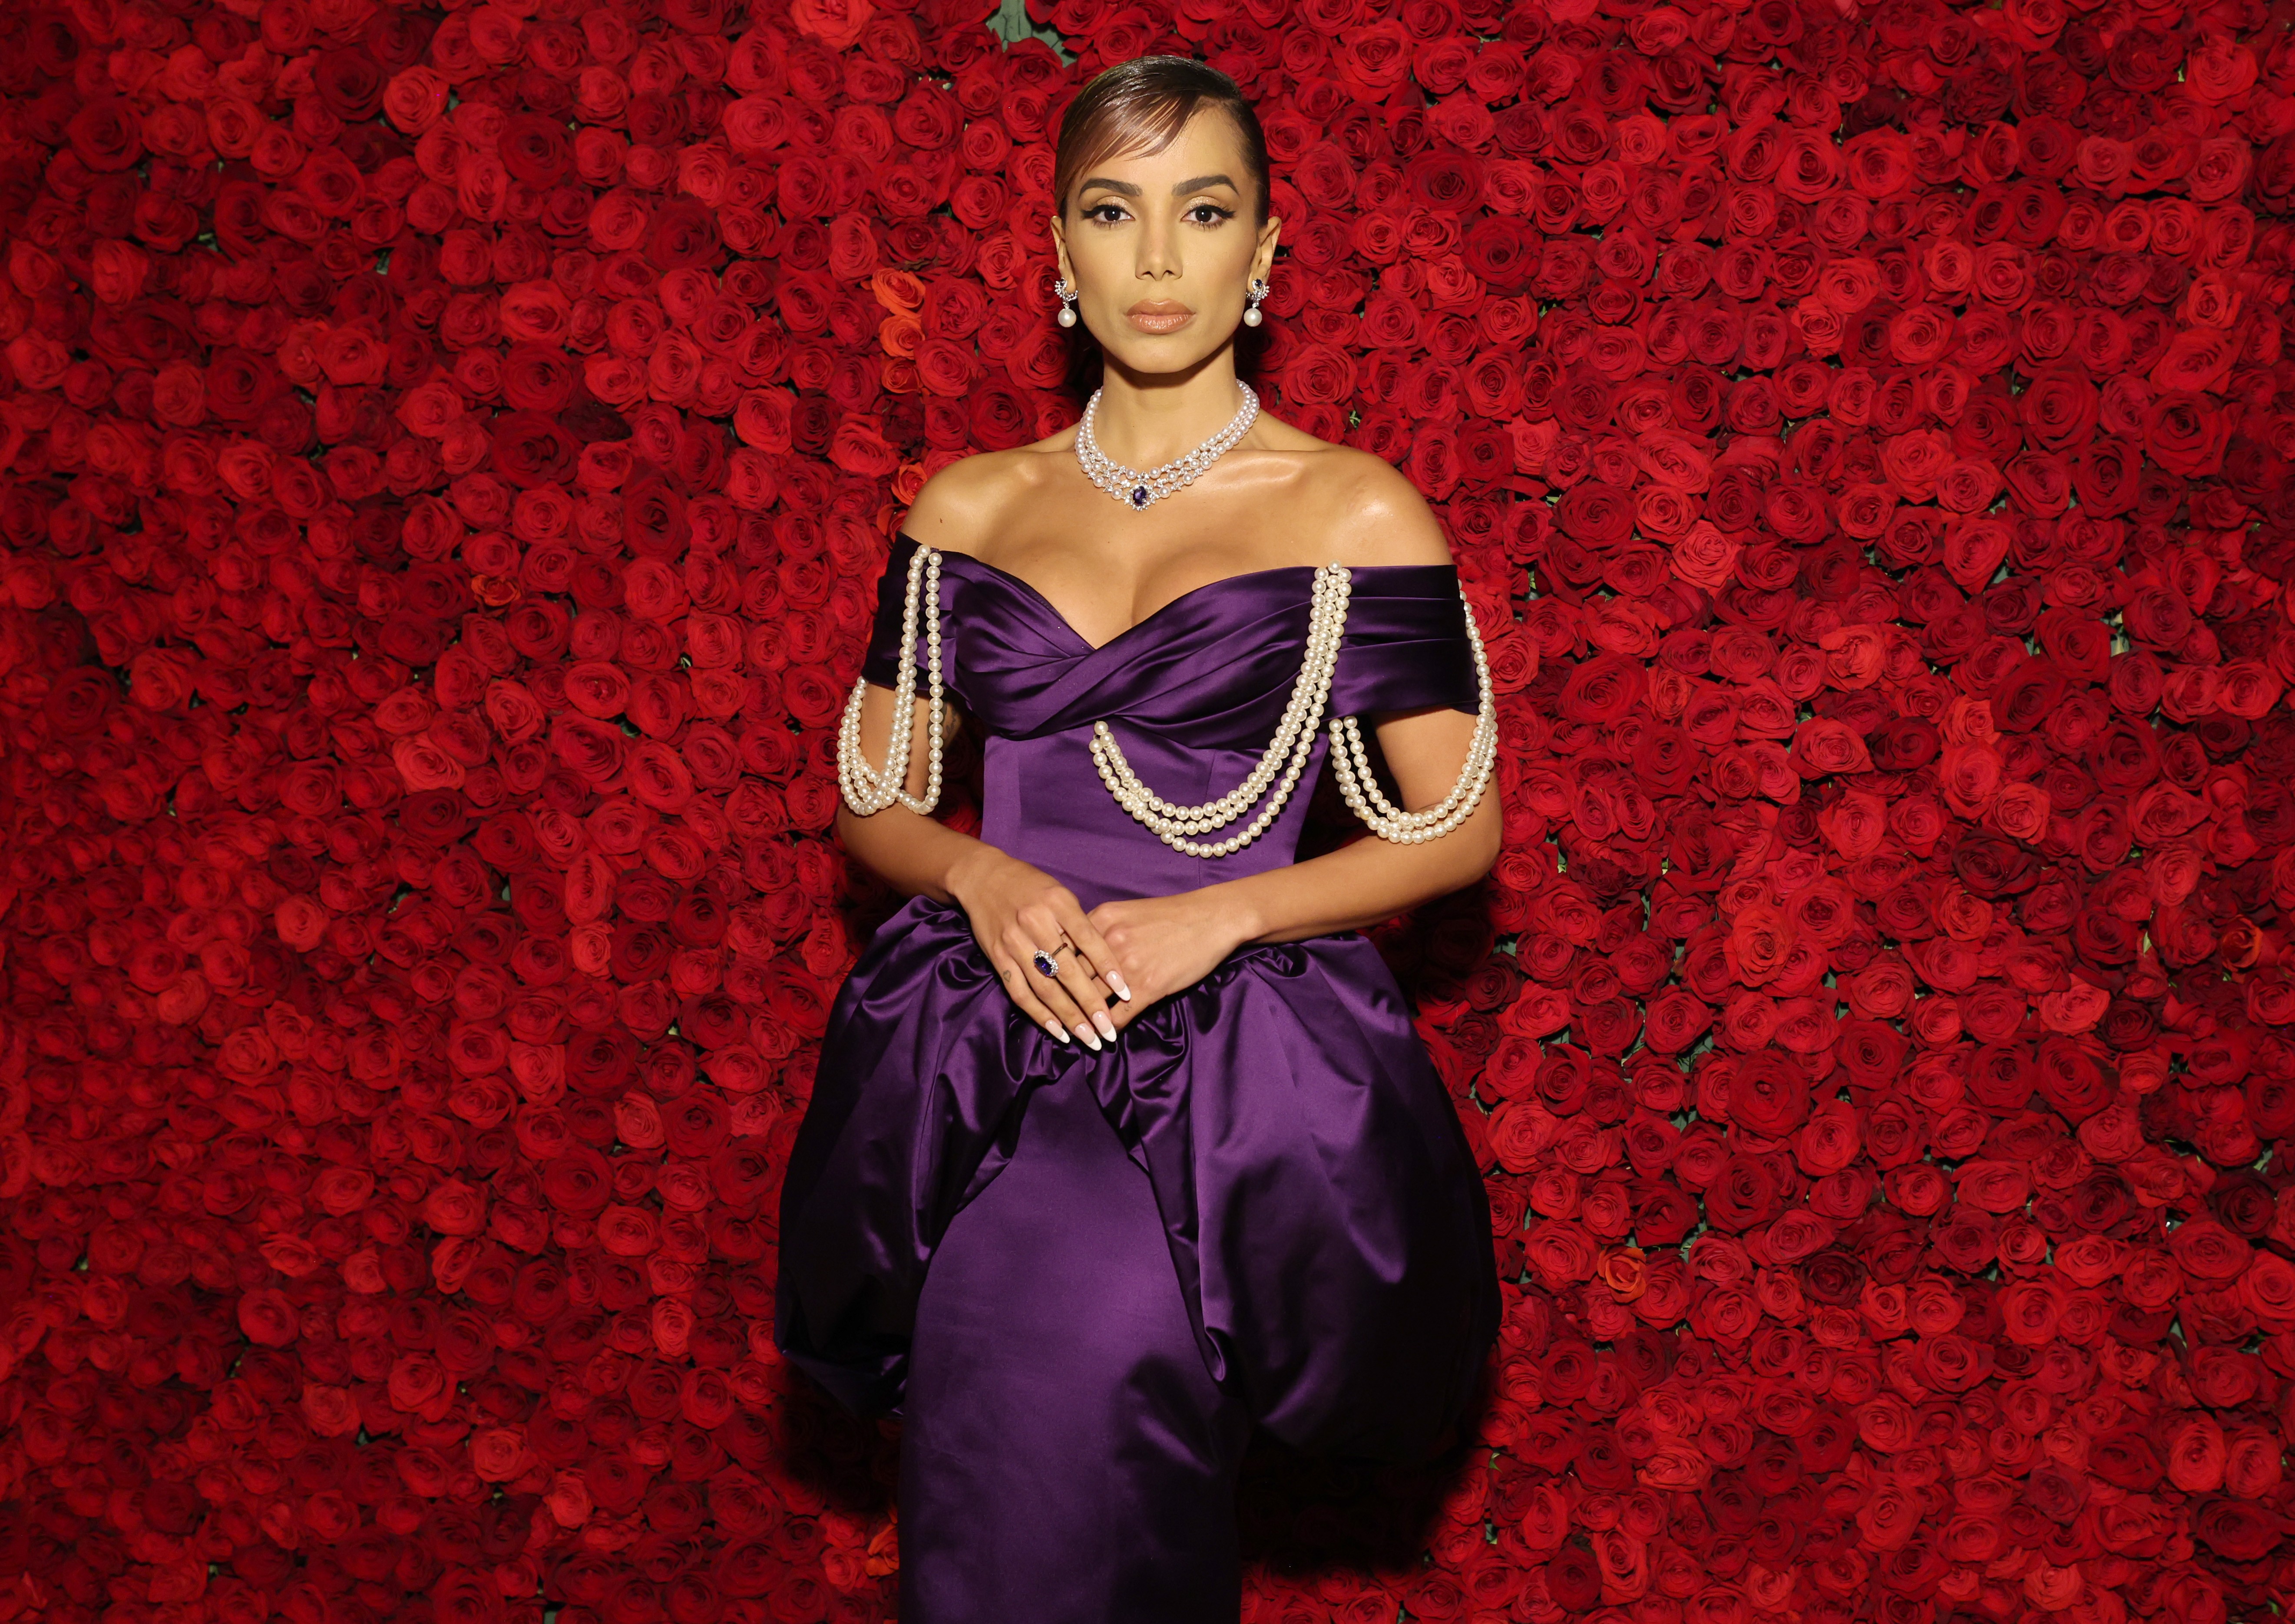 NEW YORK, NEW YORK - MAY 02: (Exclusive Coverage) Anitta attends The 2022 Met Gala Celebrating "In America: An Anthology of Fashion" at The Metropolitan Museum of Art on May 02, 2022 in New York City. (Photo by Cindy Ord/MG22/Getty Images for The Met Muse (Foto: Getty Images for The Met Museum/)